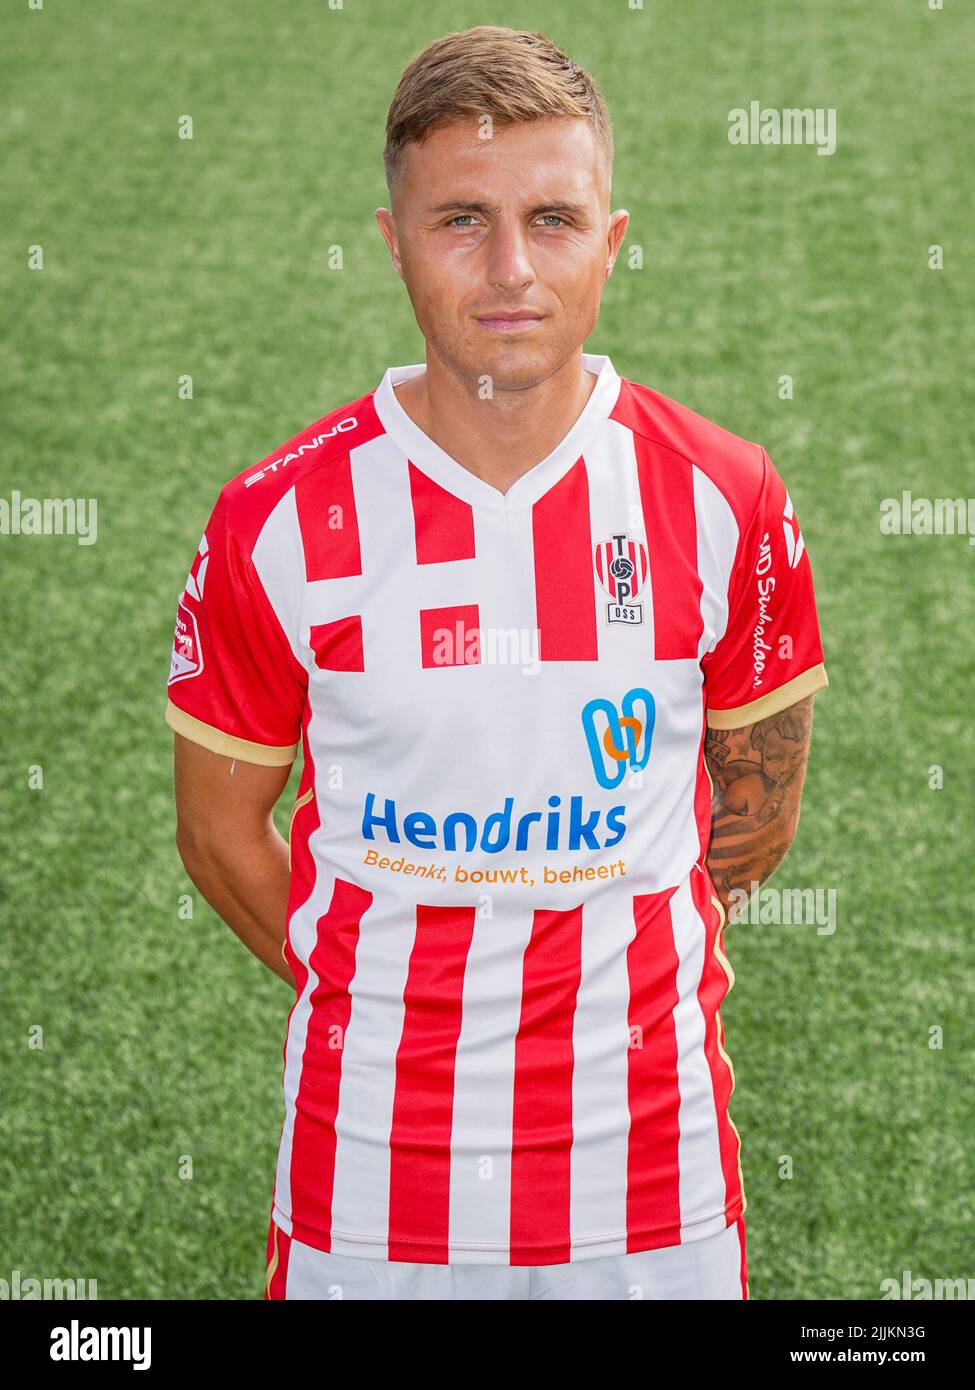 OSS, NETHERLANDS - JULY 27: Dean van der Sluys of TOP Oss during a Press Photocall of TOP Oss at the Frans Heesen Stadion on July 27, 2022 in Oss, Netherlands. (Photo by Joris Verwijst/Orange Pictures) Stock Photo